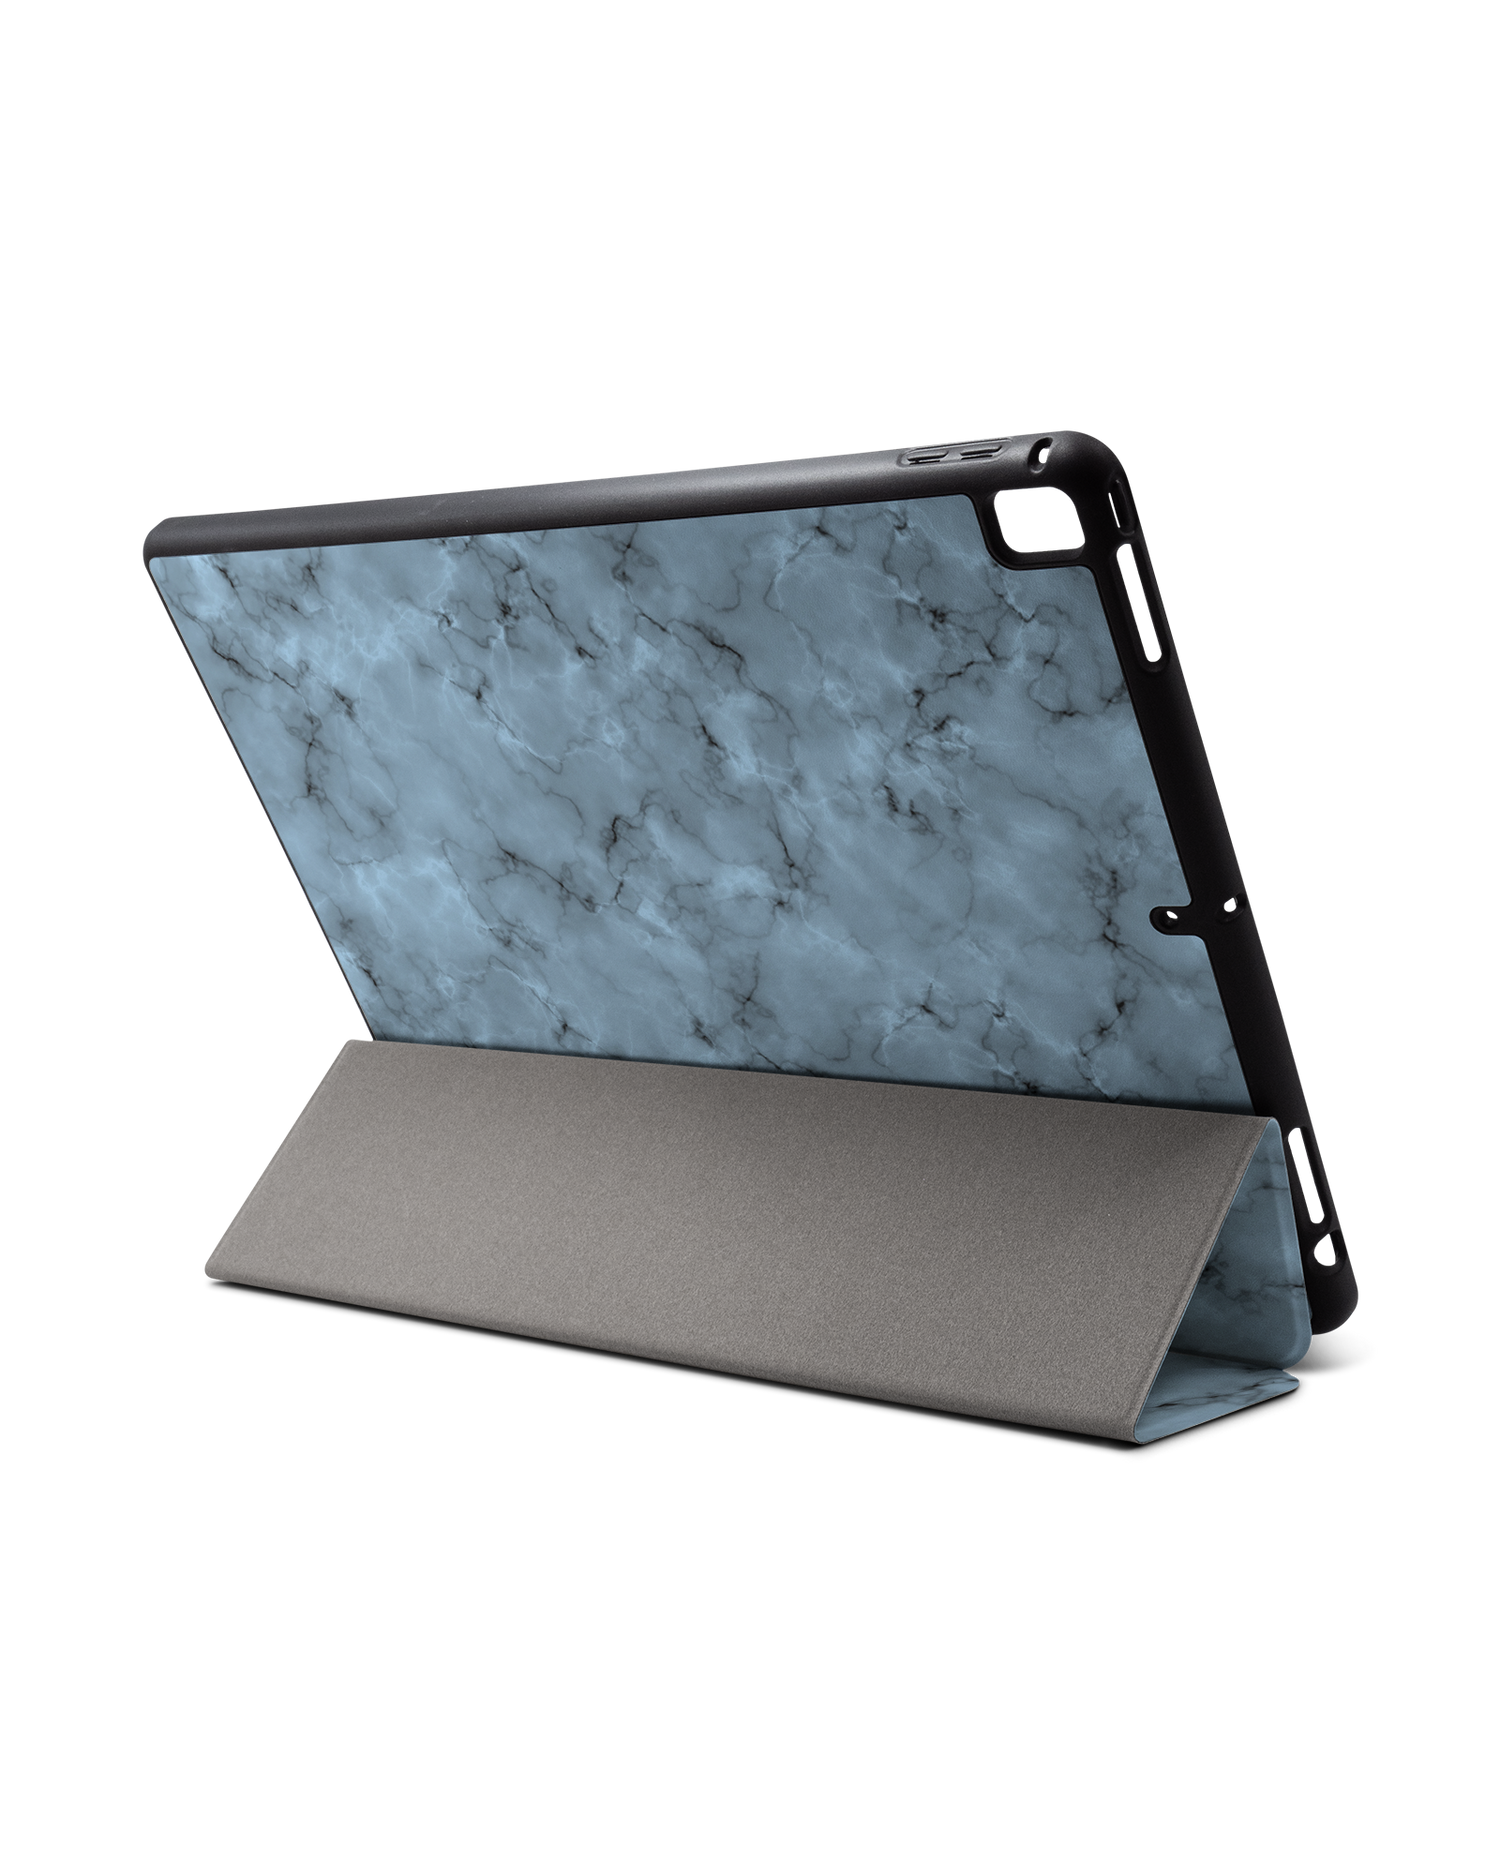 Blue Marble iPad Case with Pencil Holder for Apple iPad Pro 2 12.9